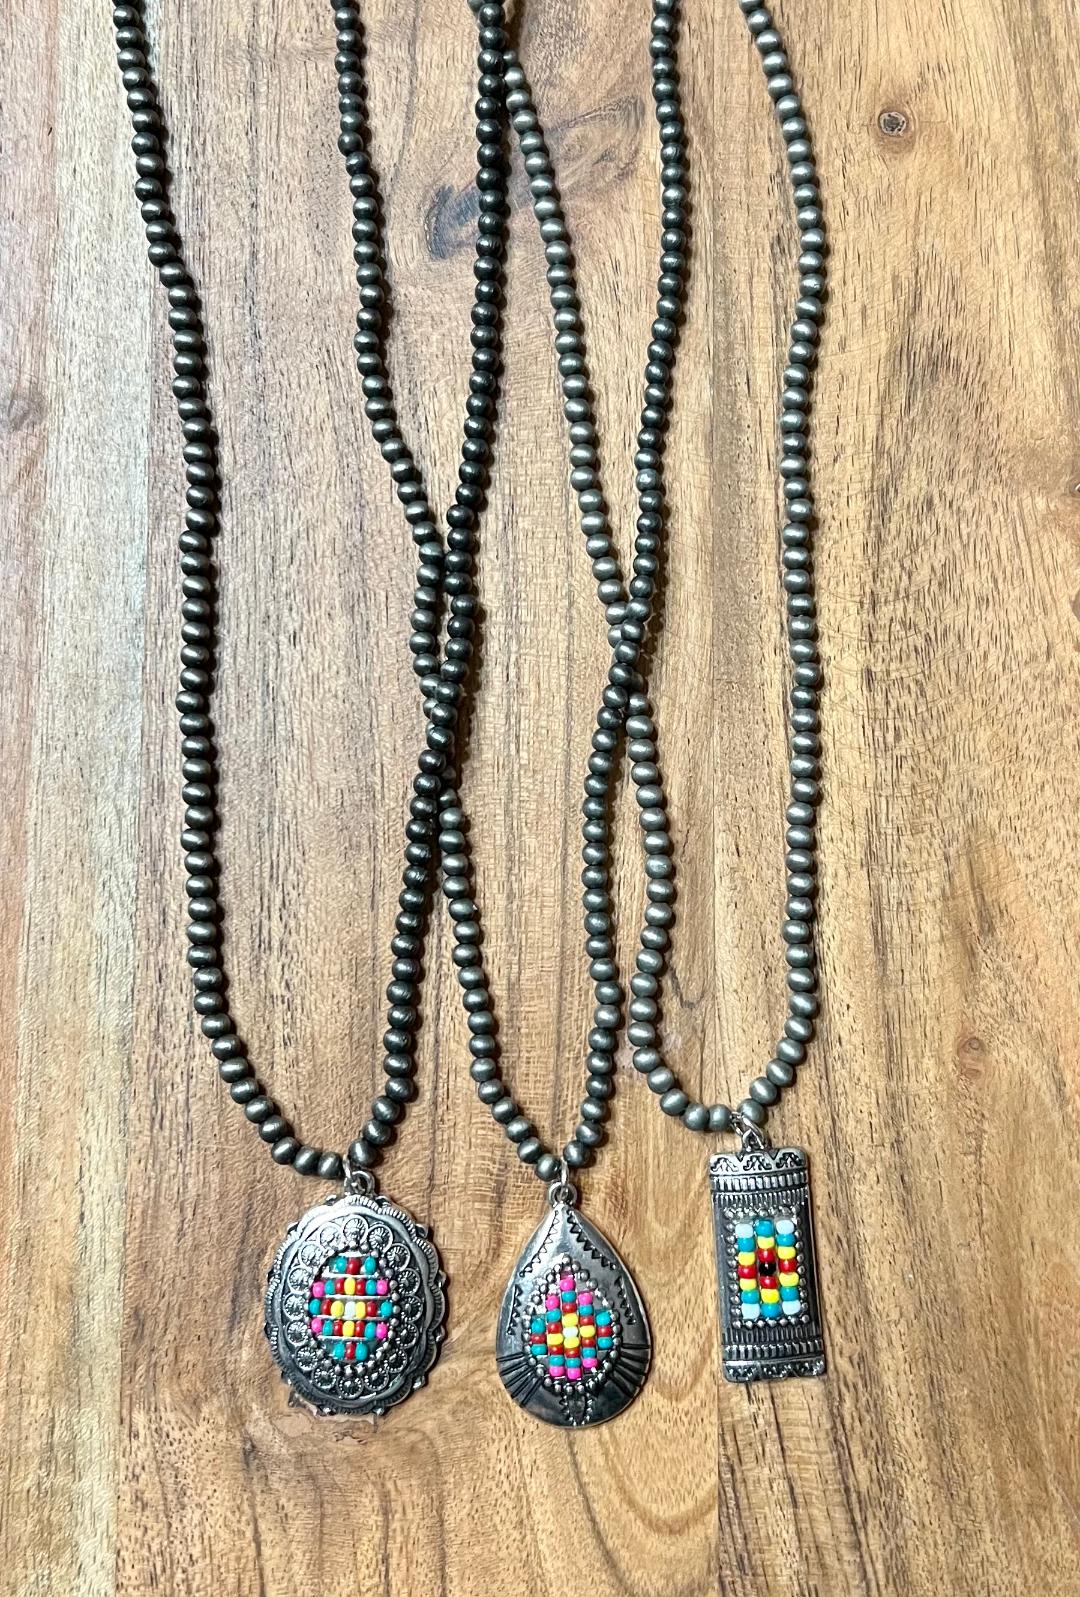 Inlay Beaded Necklace